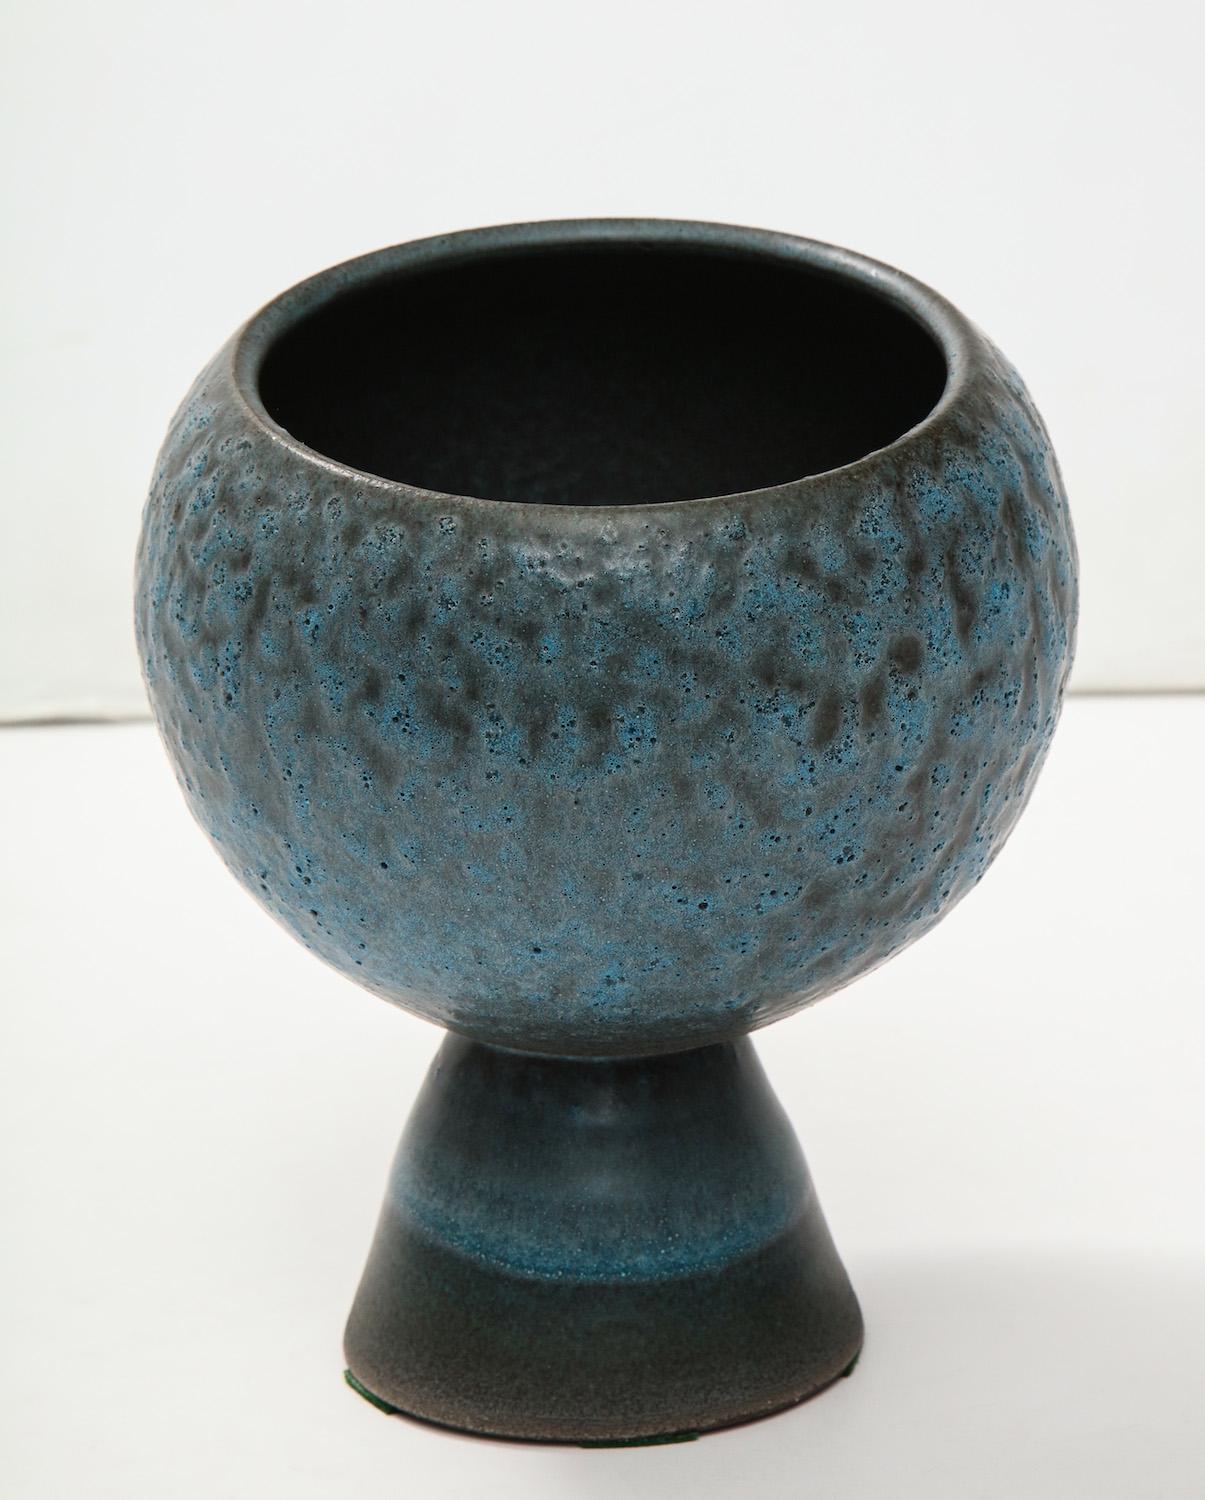 Cone-shaped foot and cut-orb bowl. Both pieces wheel-thrown, and bubbly blue glaze. Artist signed on underside.